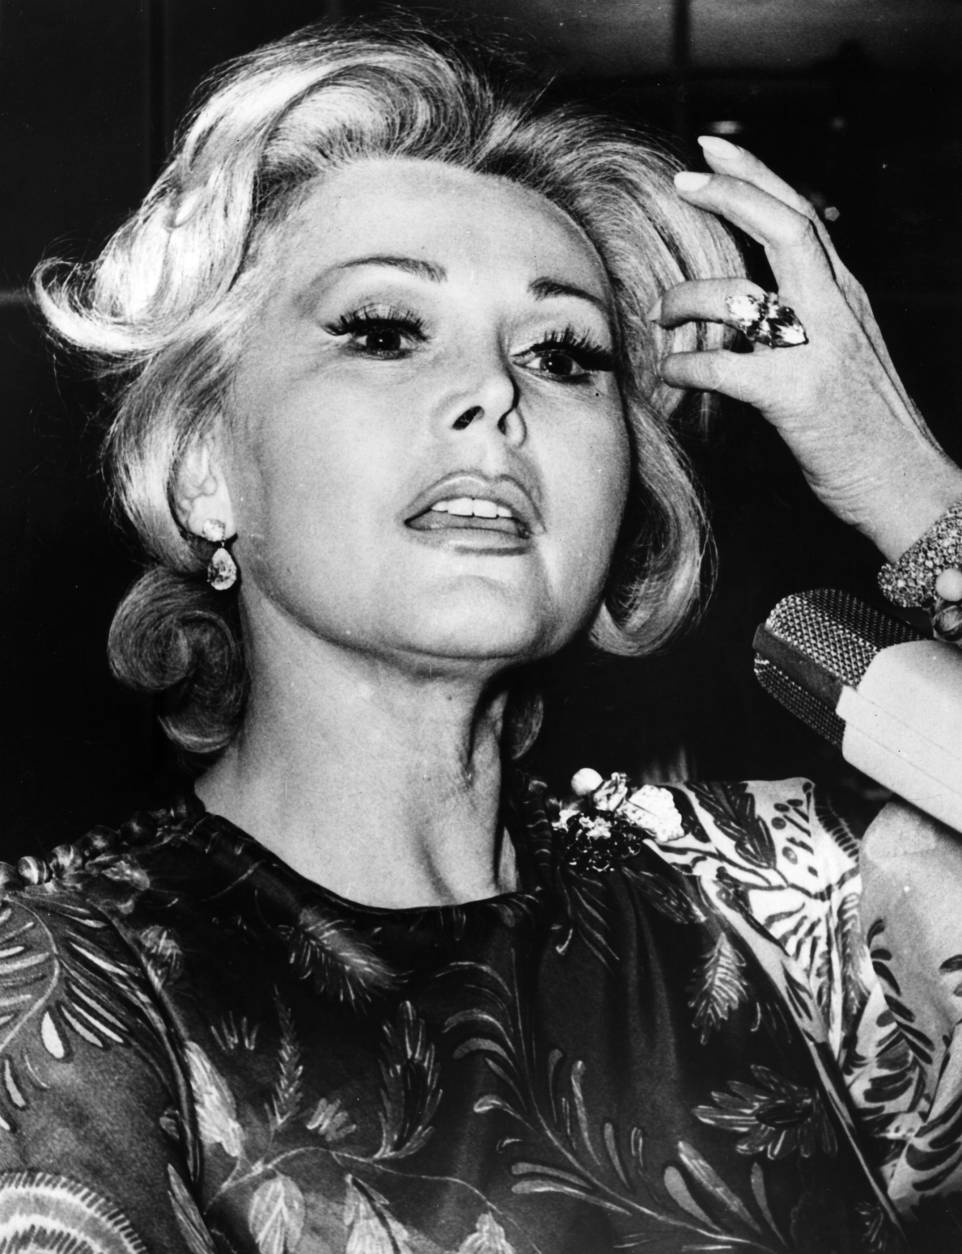 circa 1961:  Zsa Zsa Gabor, the film actress.  (Photo by Central Press/Getty Images)